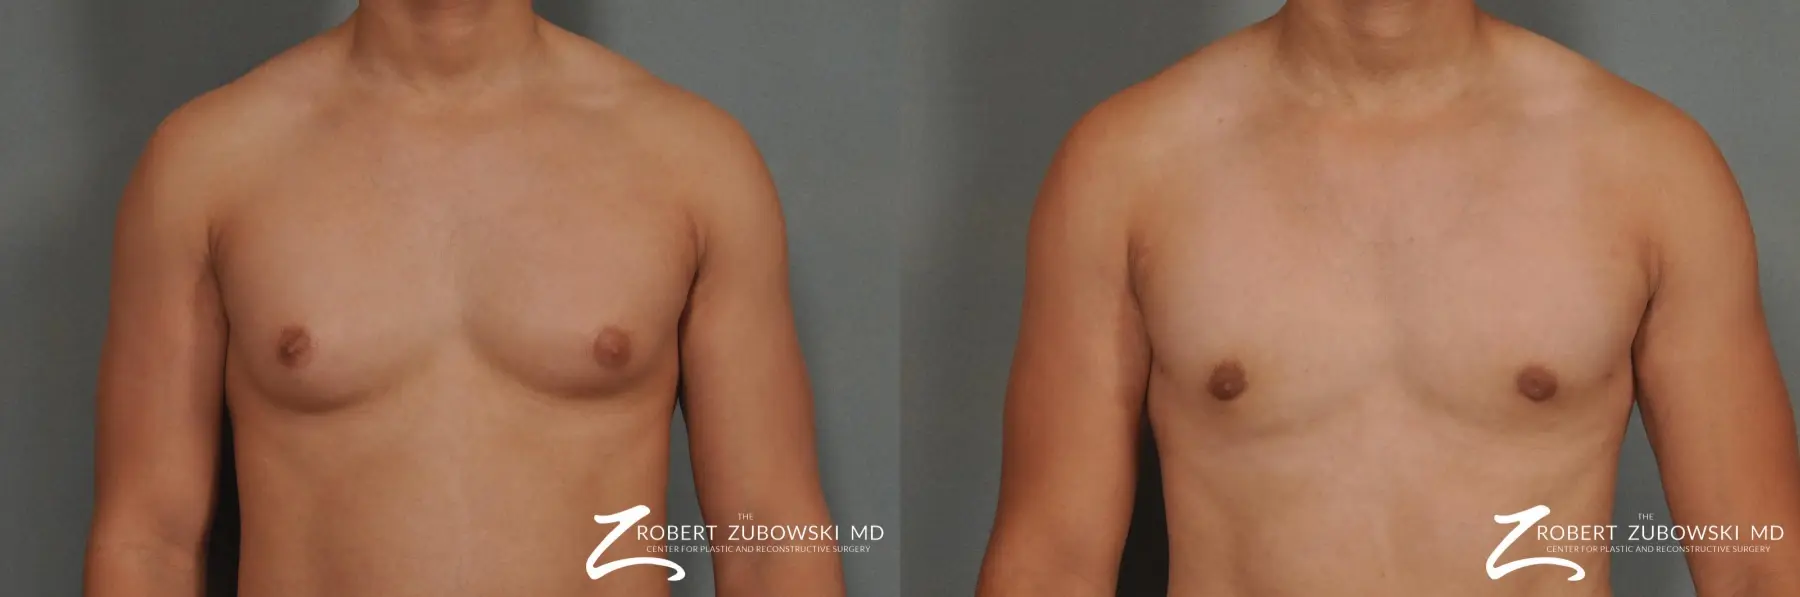 Gynecomastia: Patient 3 - Before and After 1